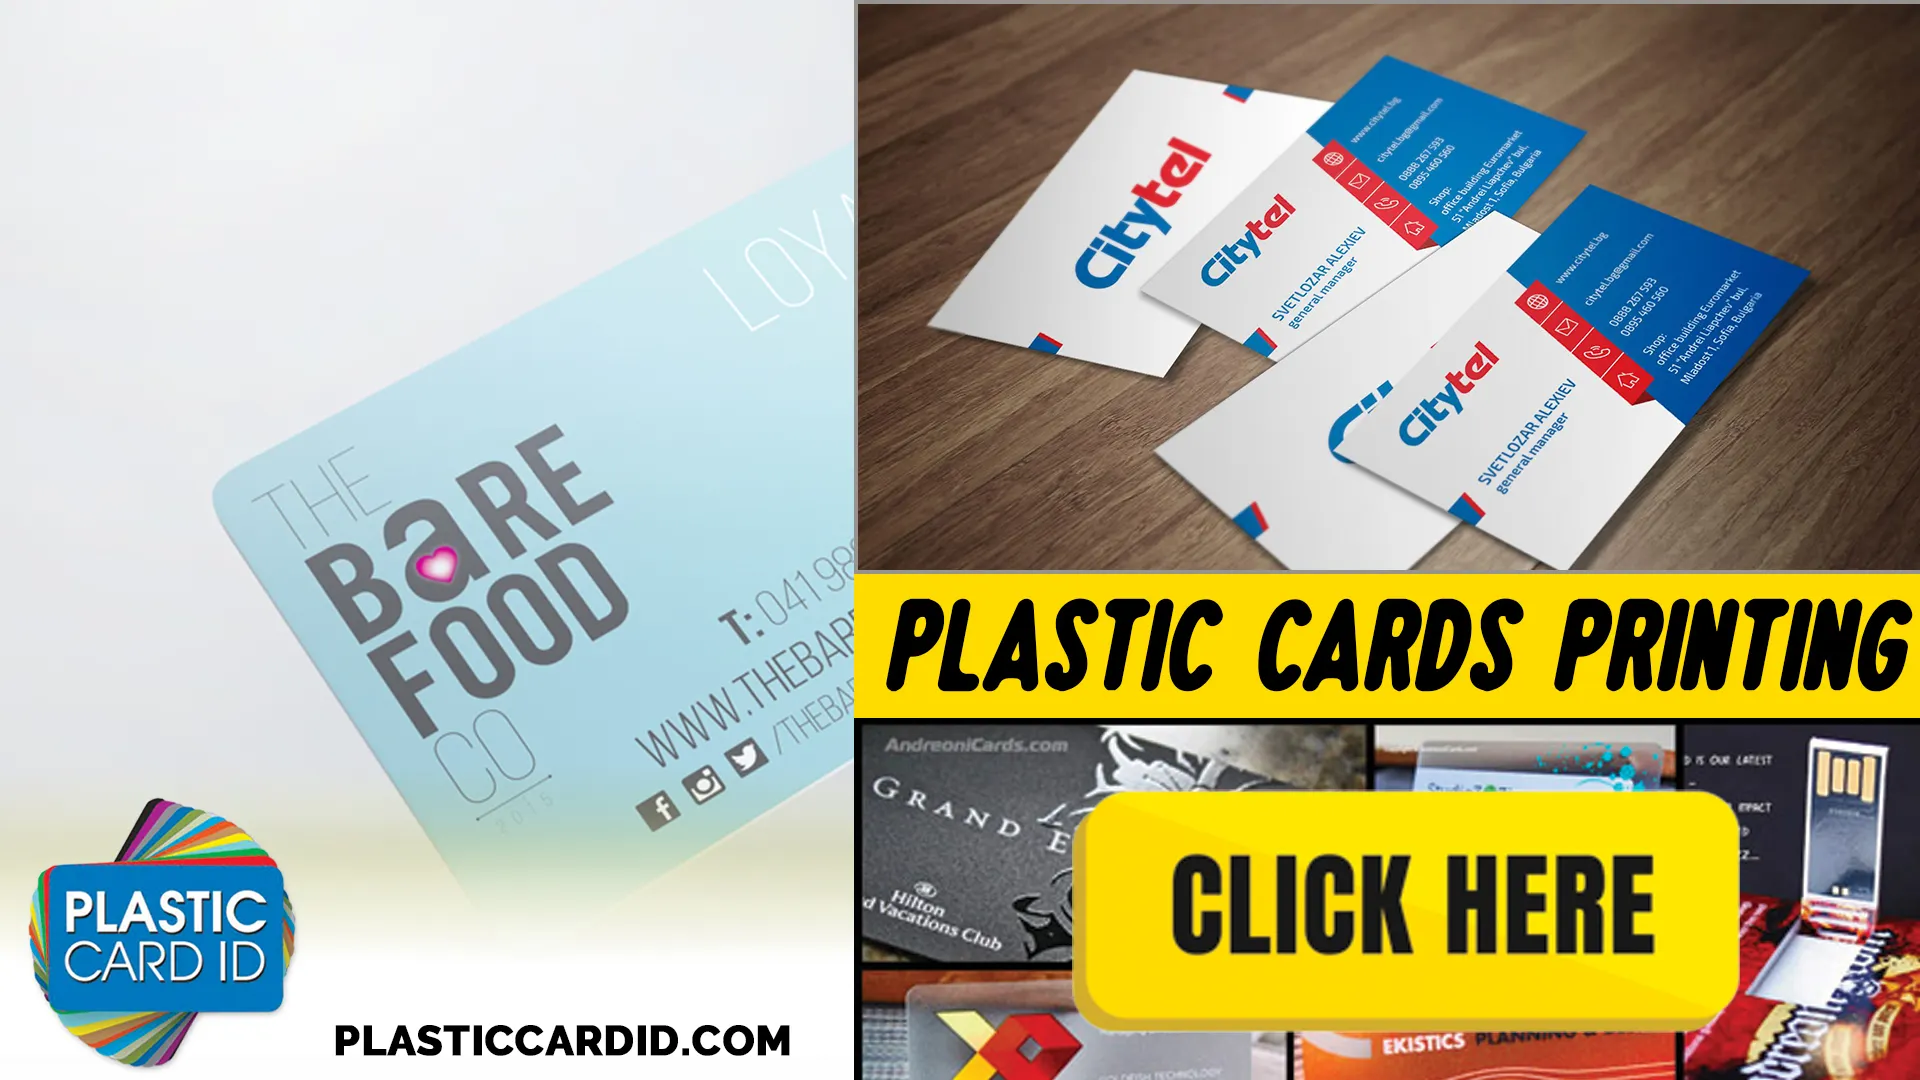 Our Comprehensive Range of Card Types